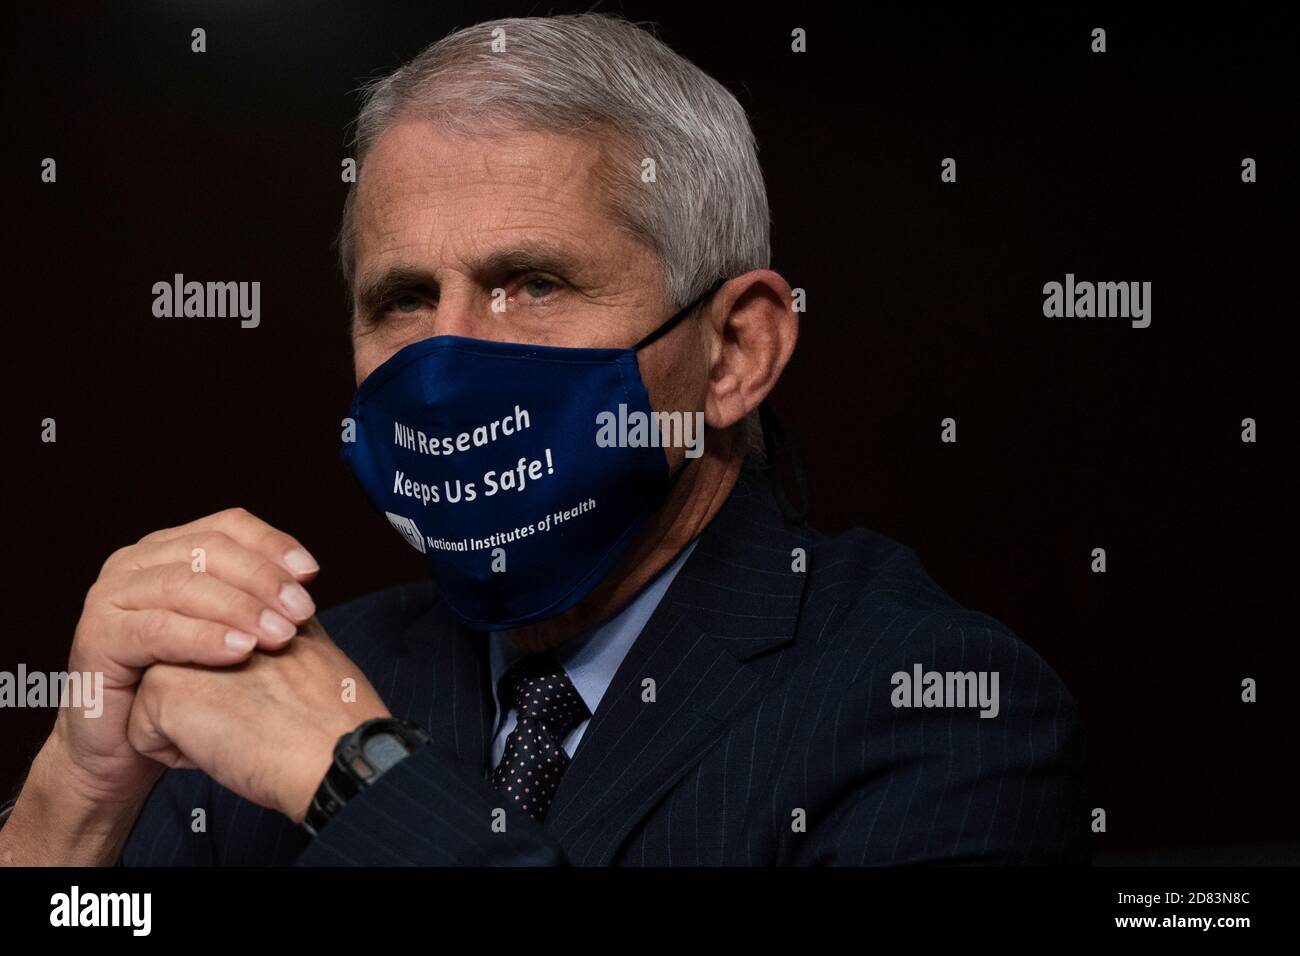 Anthony Fauci, MD, Director, National Institute of Allergy and Infectious Diseases, National Institutes of Health; testifies during a U.S. Senate Senate Health, Education, Labor, and Pensions Committee Hearing to examine COVID-19, focusing on an update on the federal response at the U.S. Capitol on September 23, 2020 in Washington, D.C. Credit: Alex Edelman/The Photo Access Stock Photo